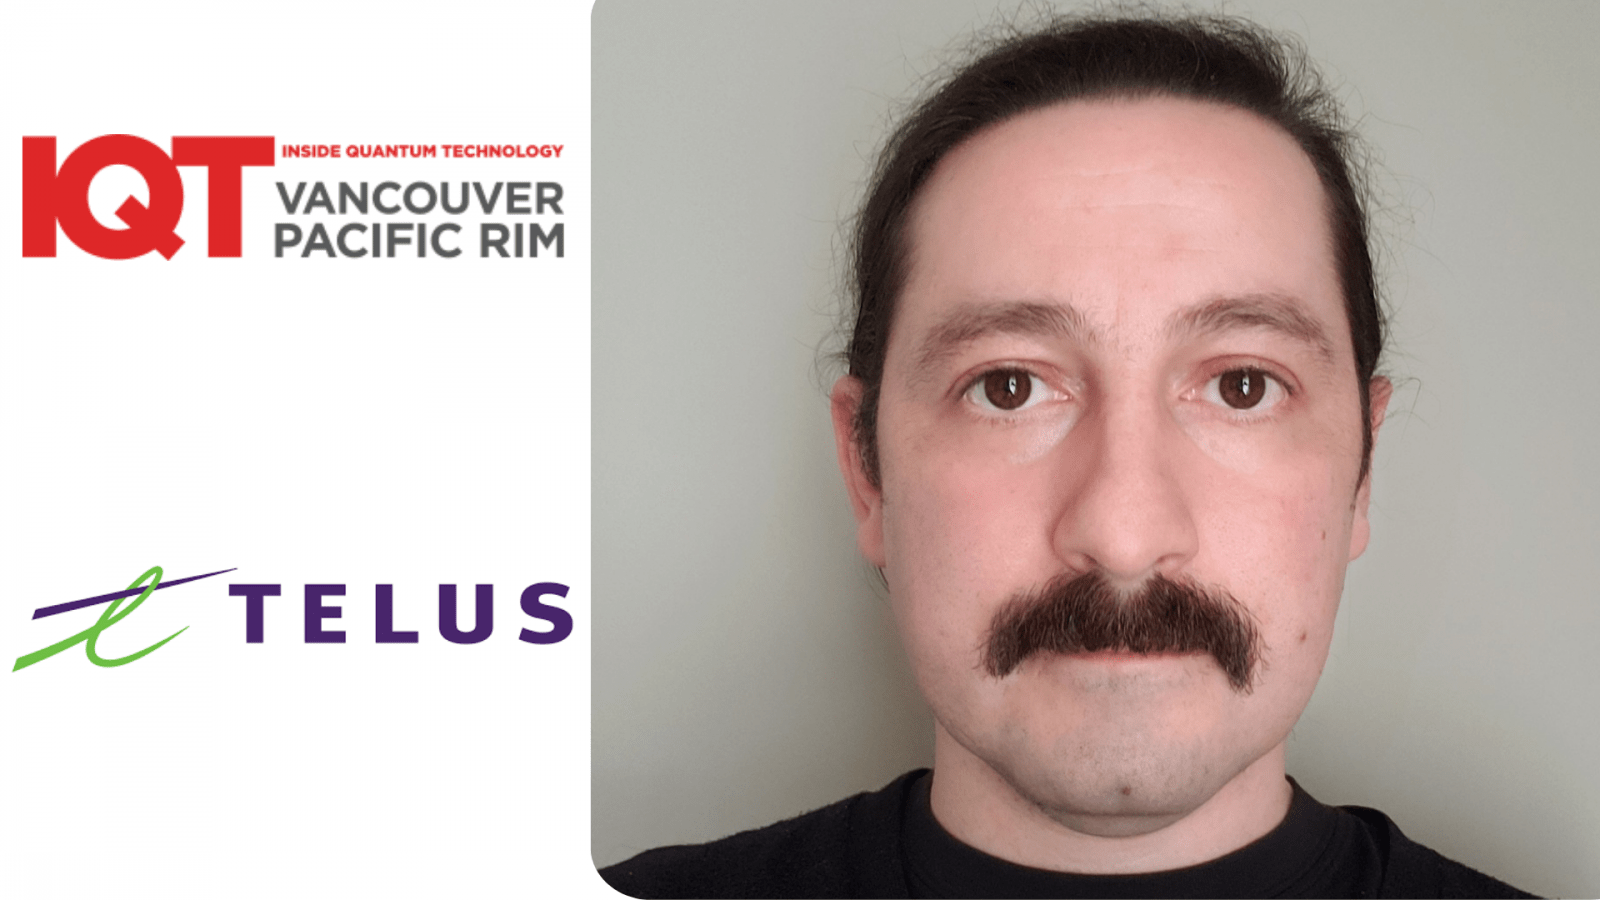 Ilijc Albanese, Senior Engineer at TELUS, is an IQT Vancouver/Pacific Rim Speaker for the 2024 conference.